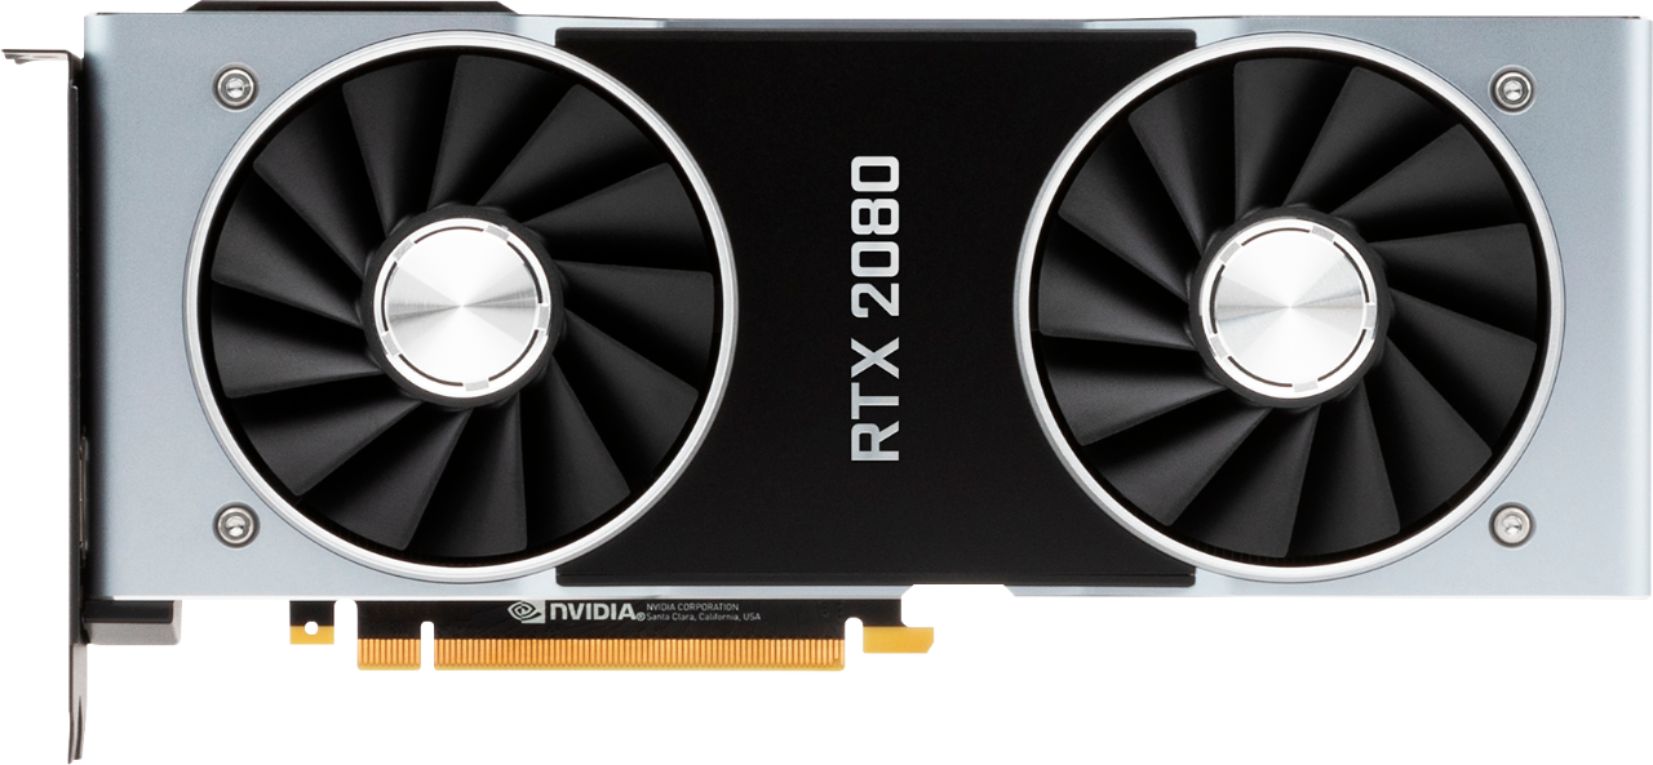 NVIDIA - GeForce RTX 2080 Founders Edition 8GB GDDR6 PCI Express 3.0 Graphics Card